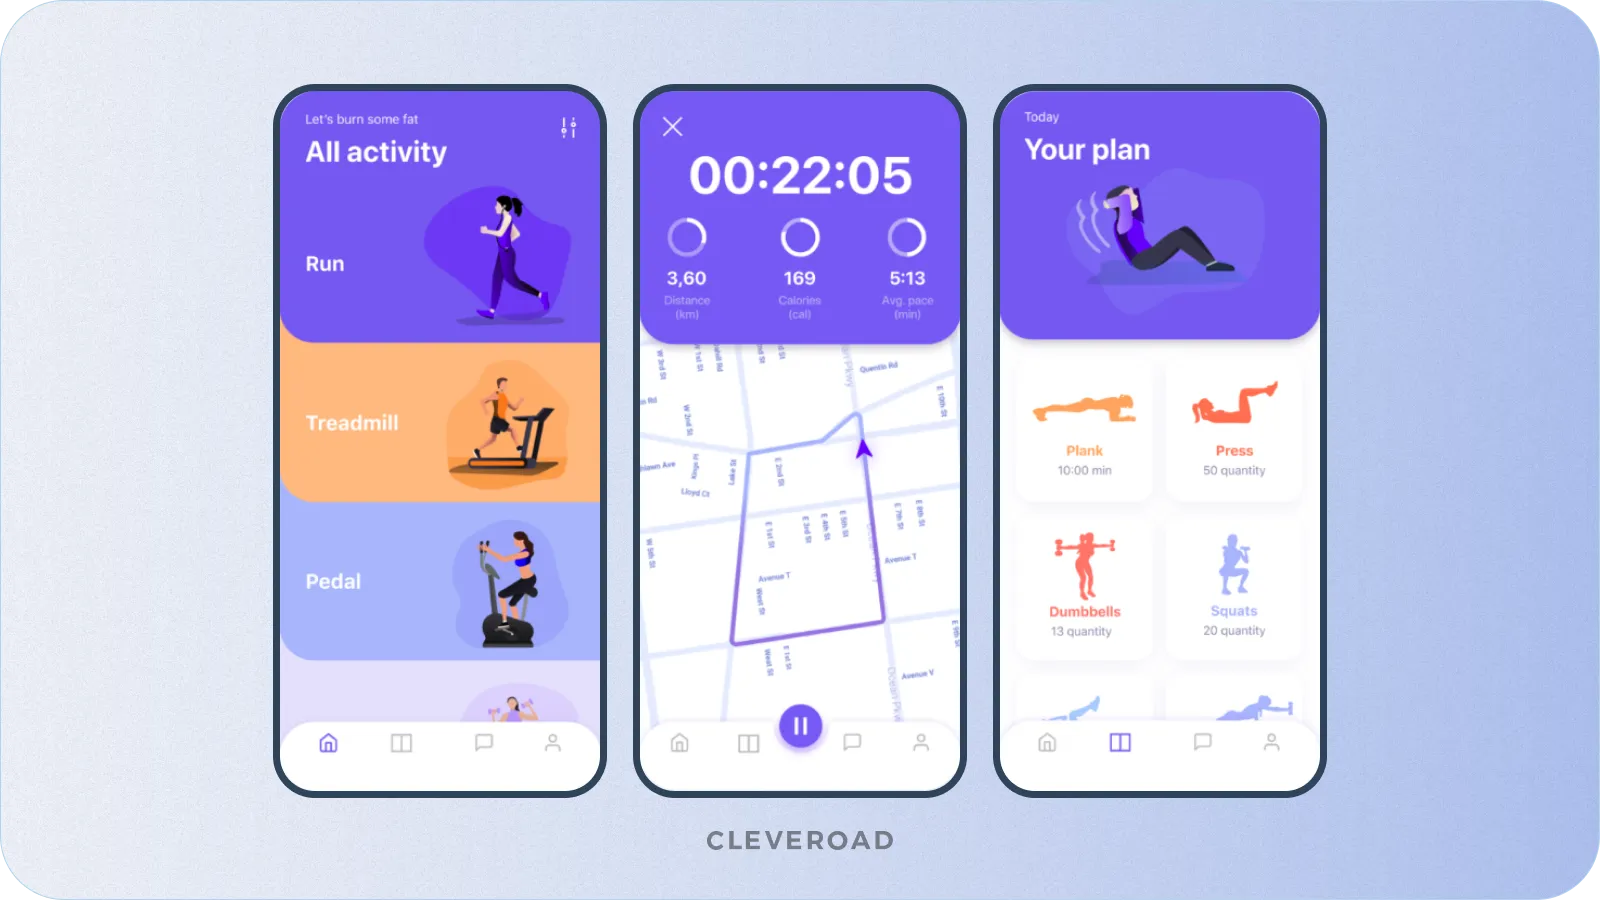 A training app interface from Cleveroad